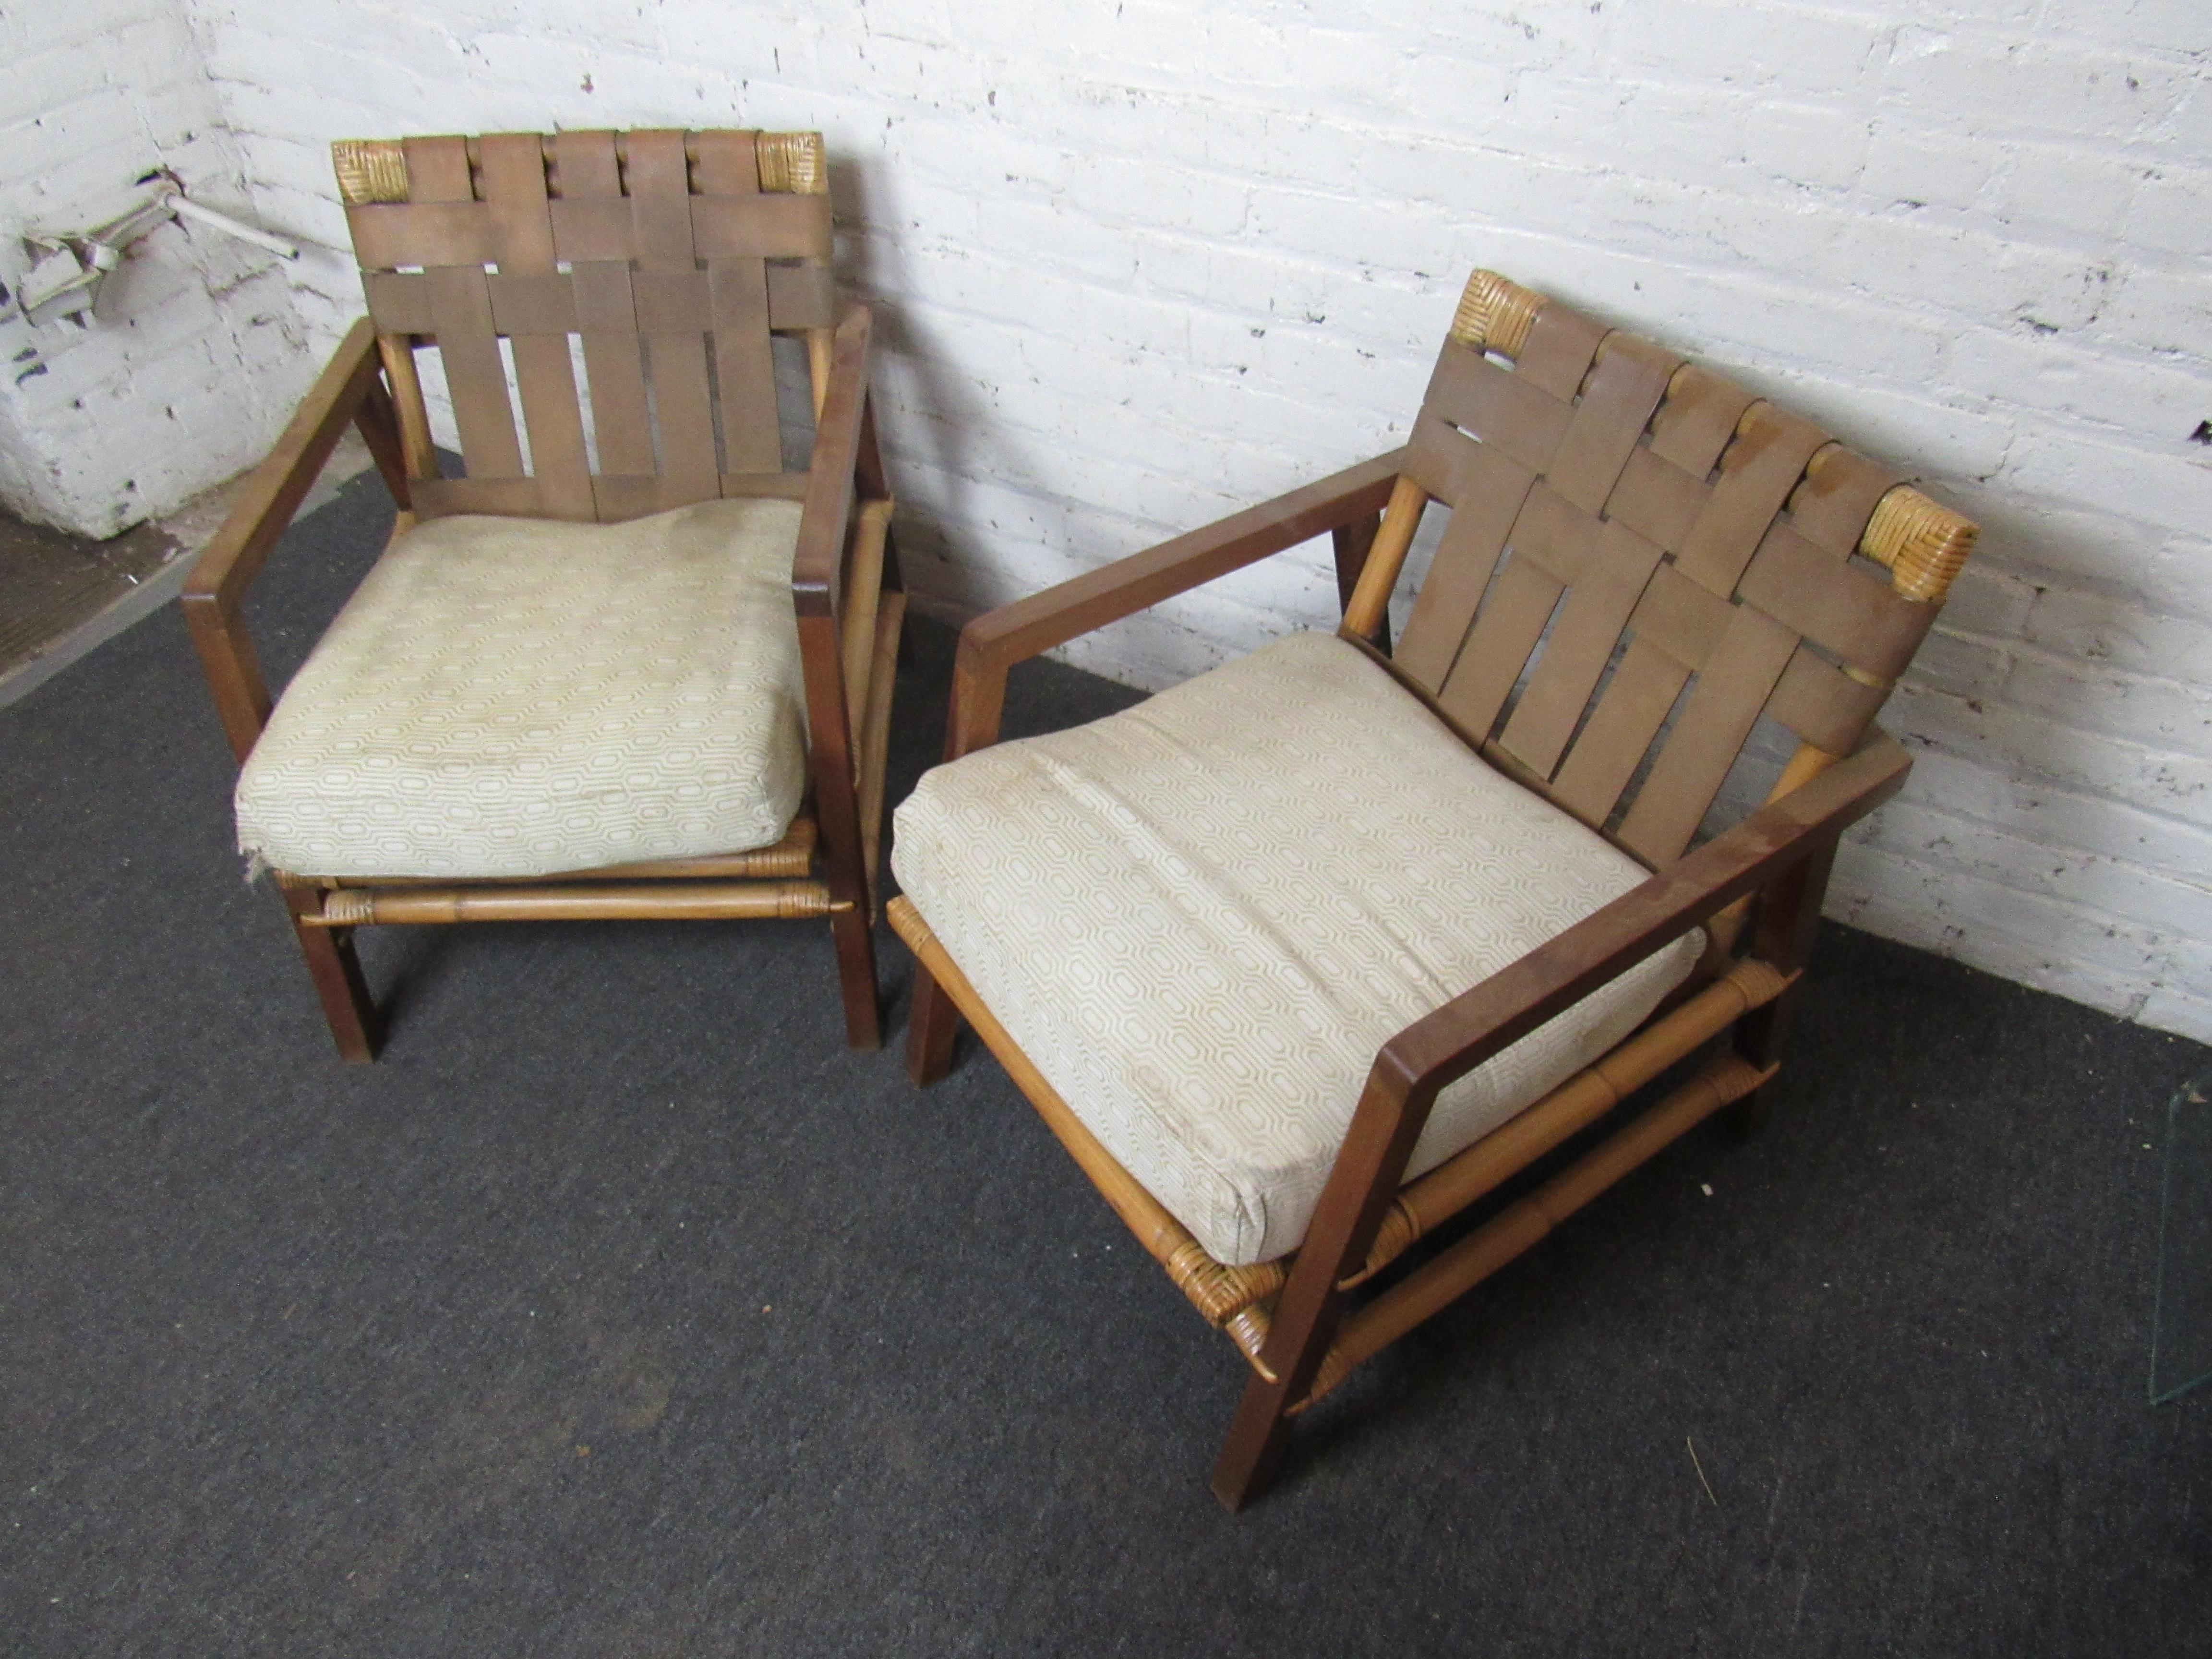 An incredible pair of lounge chairs showing off a frame of teak and bamboo, with woven backs and upholstered seat cushions. Please confirm item location with seller (NY/NJ).